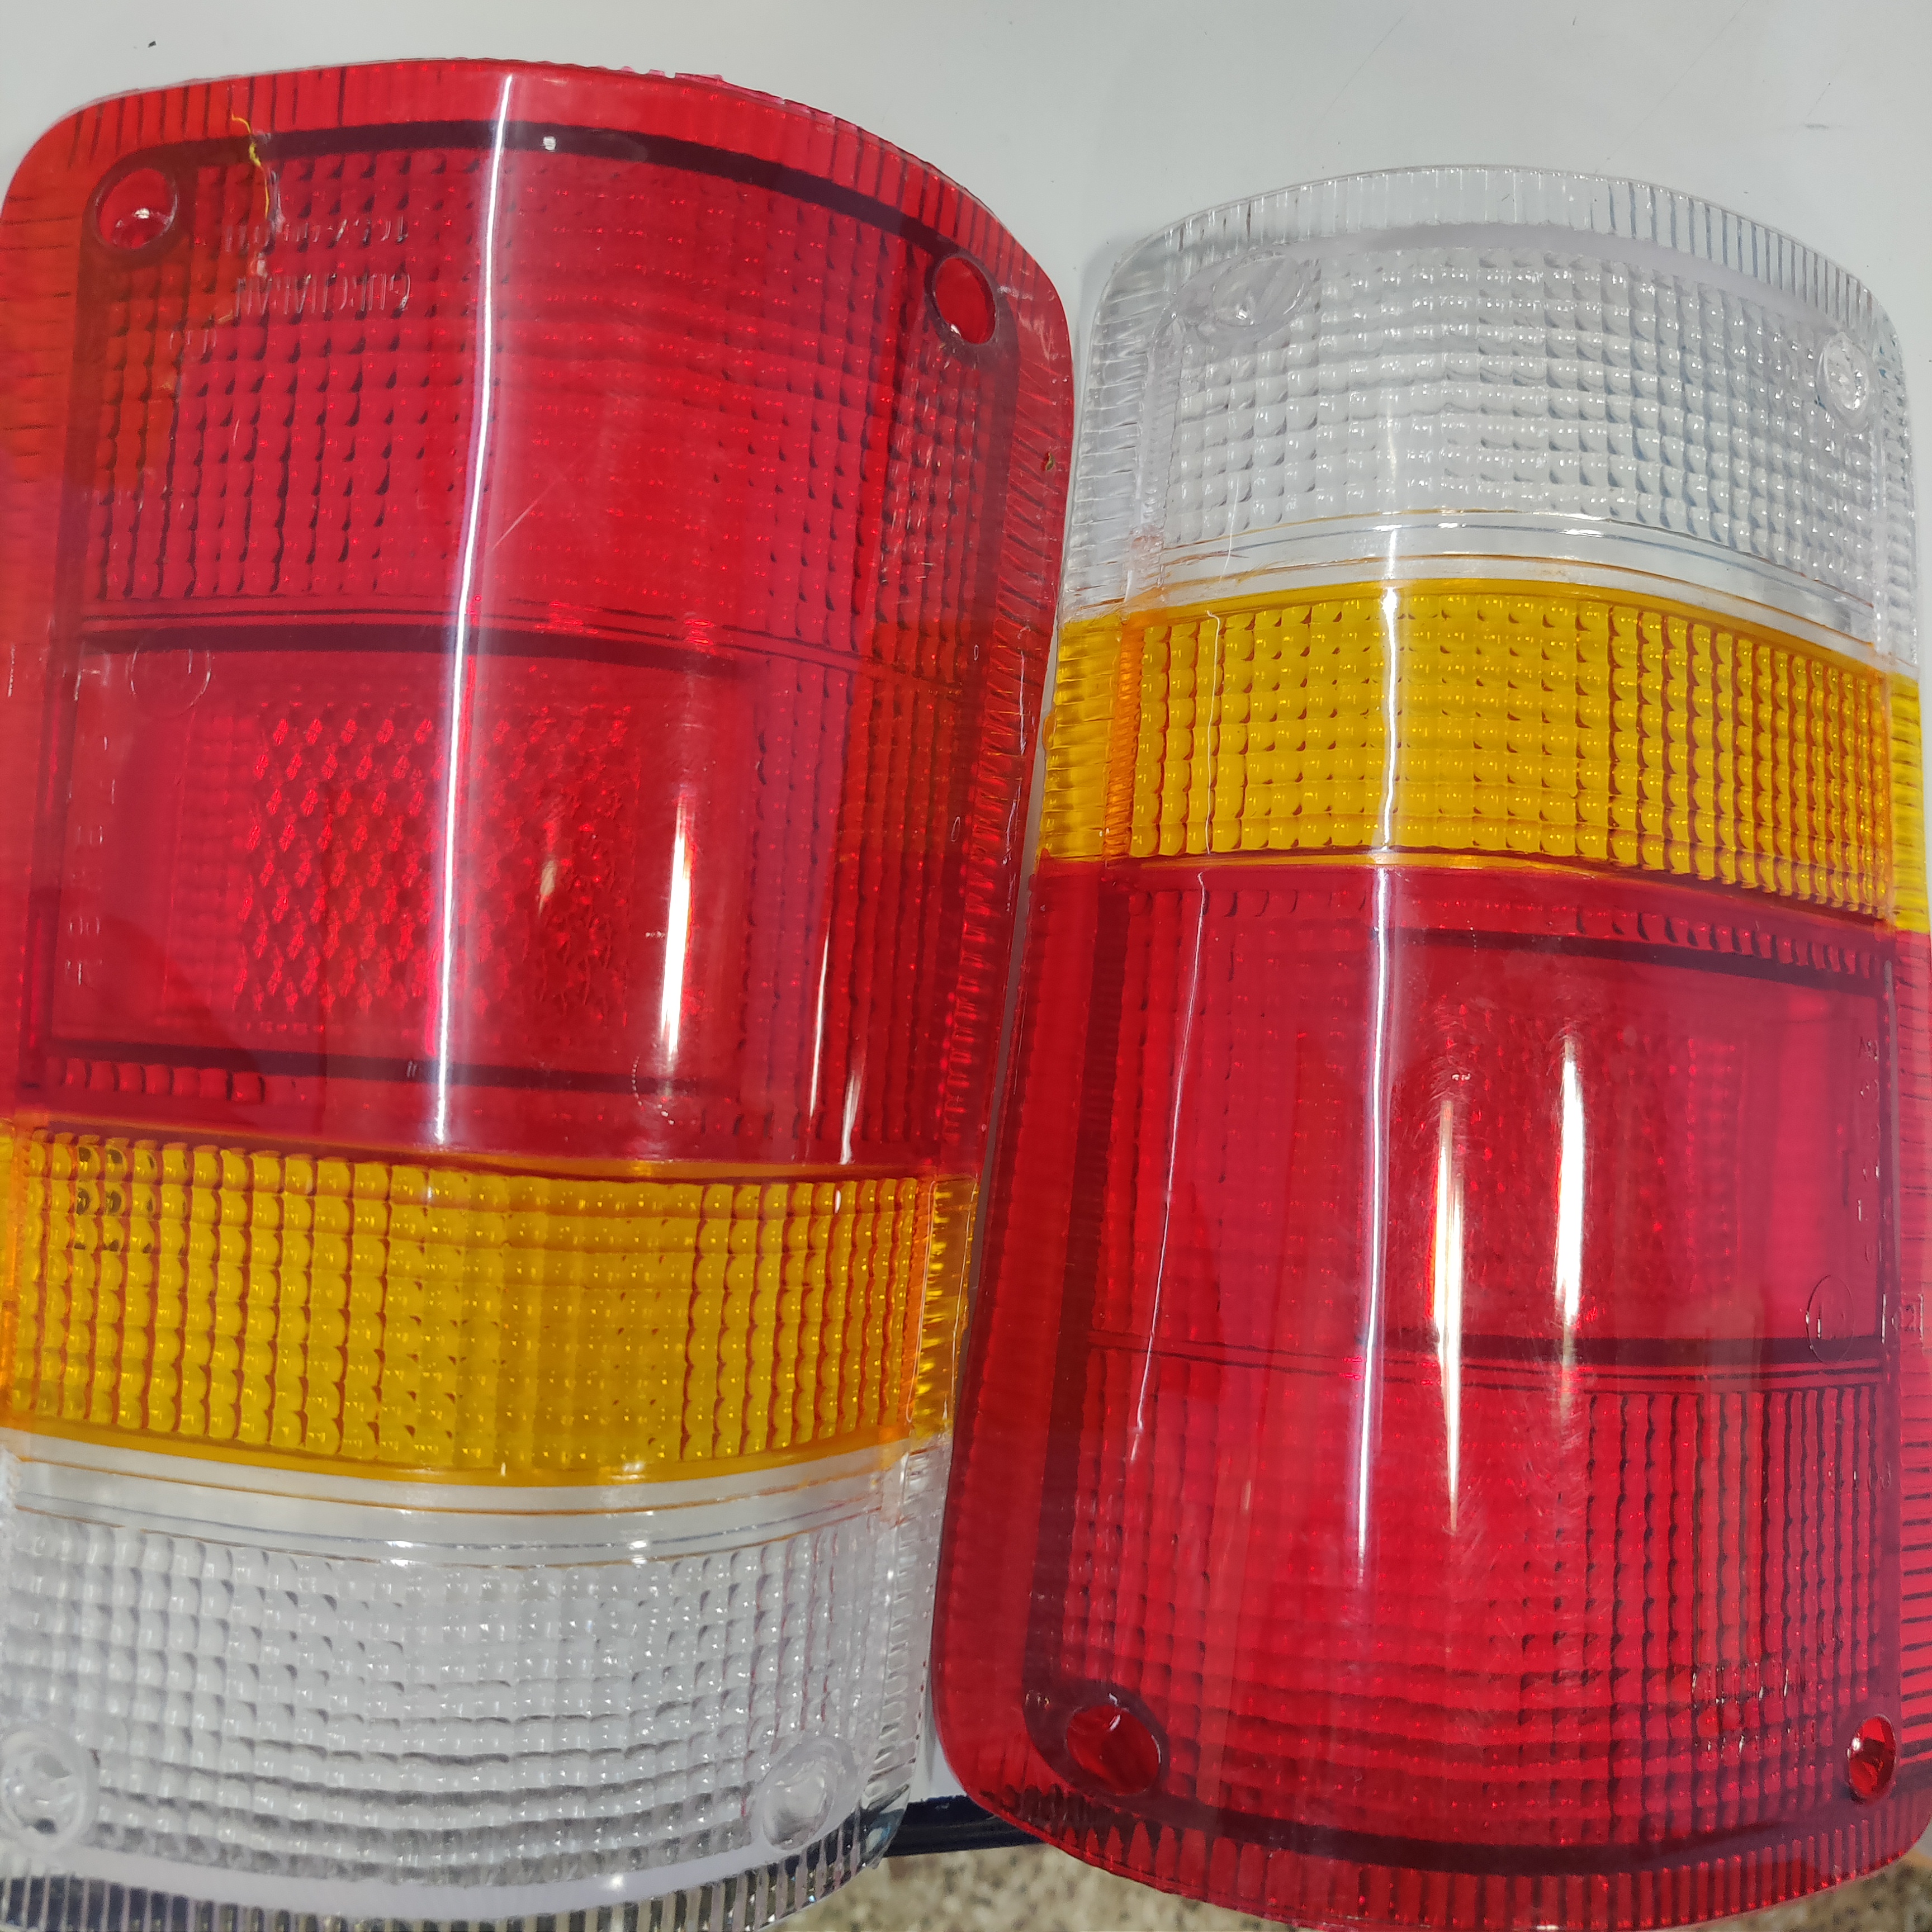 TATA TELCOLINE TAIL LAMP SET OF LENS ONLY  STOCKID 874